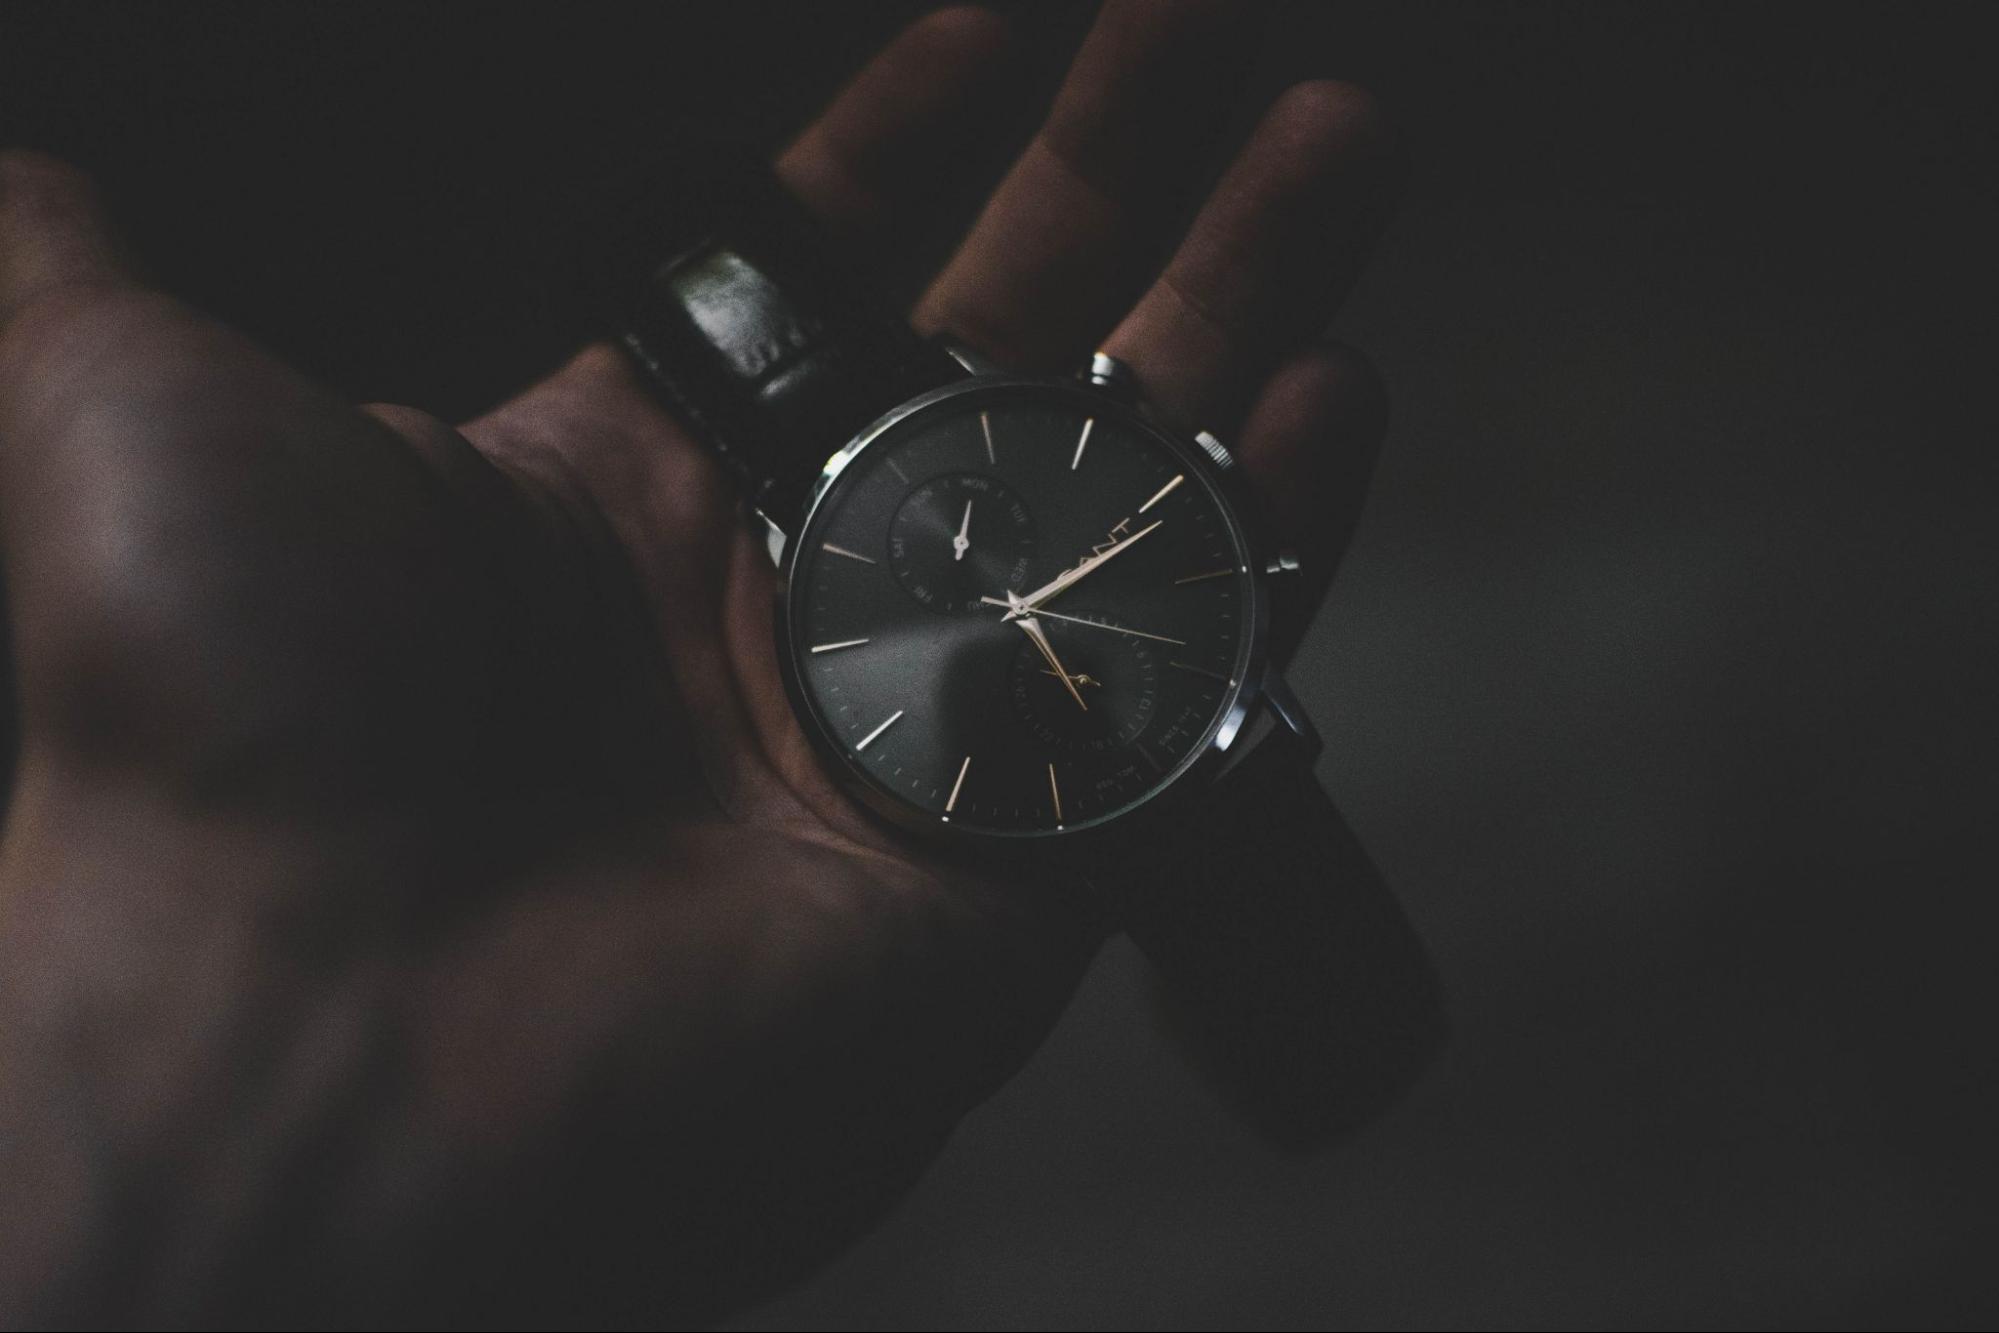 A man holds his black minimalist watch in a dimly lit room.